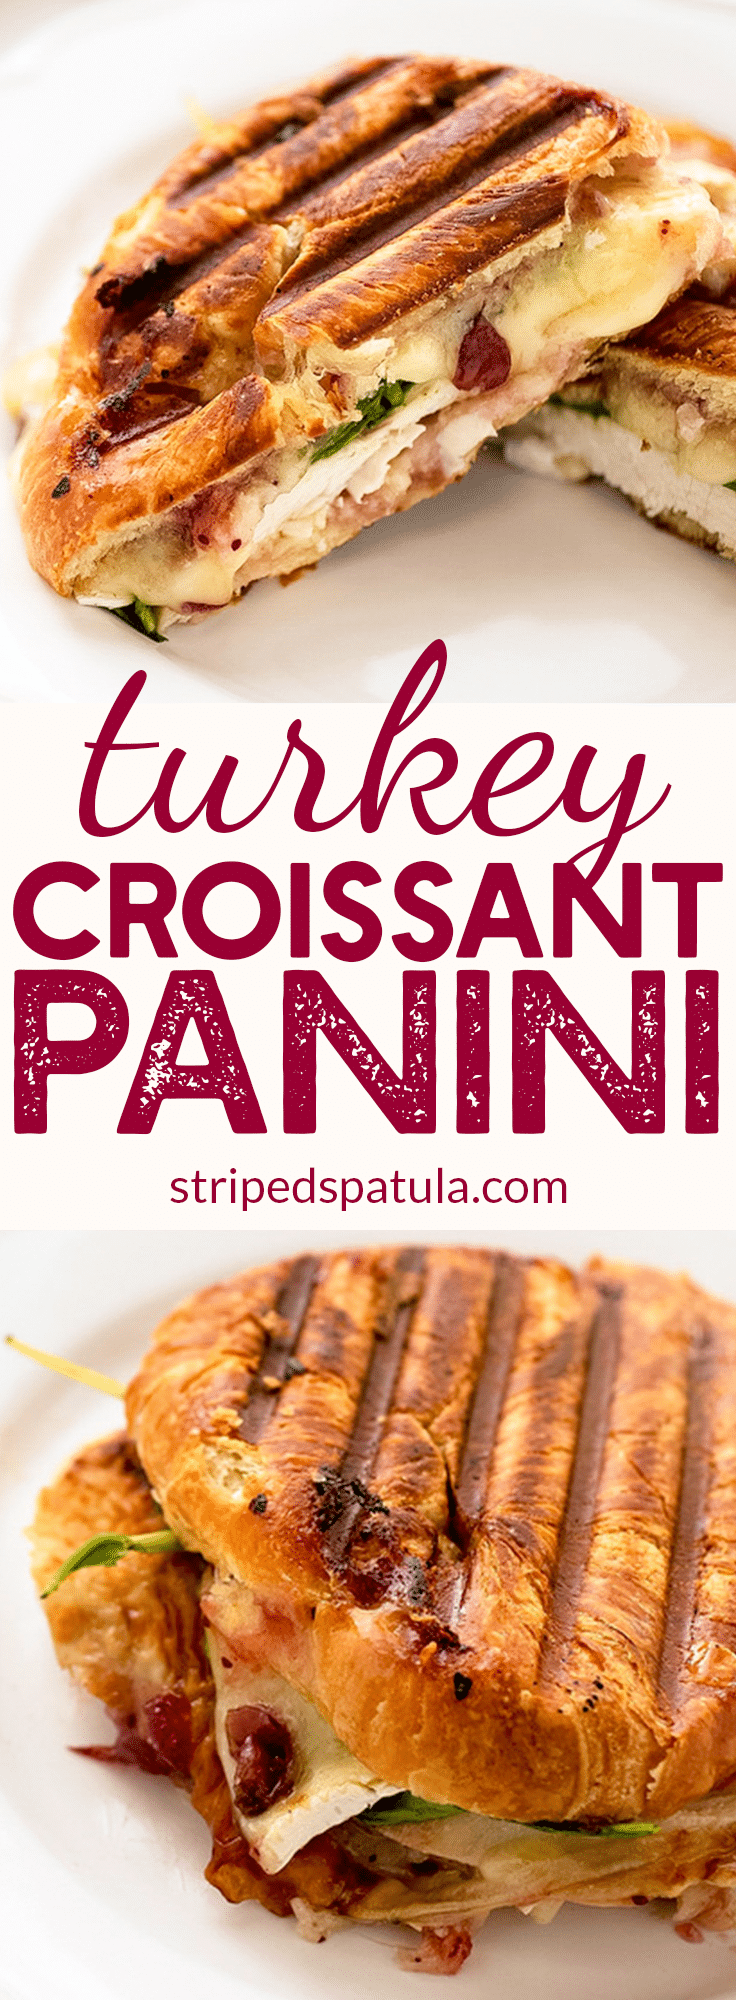 Turkey Croissant Panini with Brie and Cranberry Relish | Striped Spatula